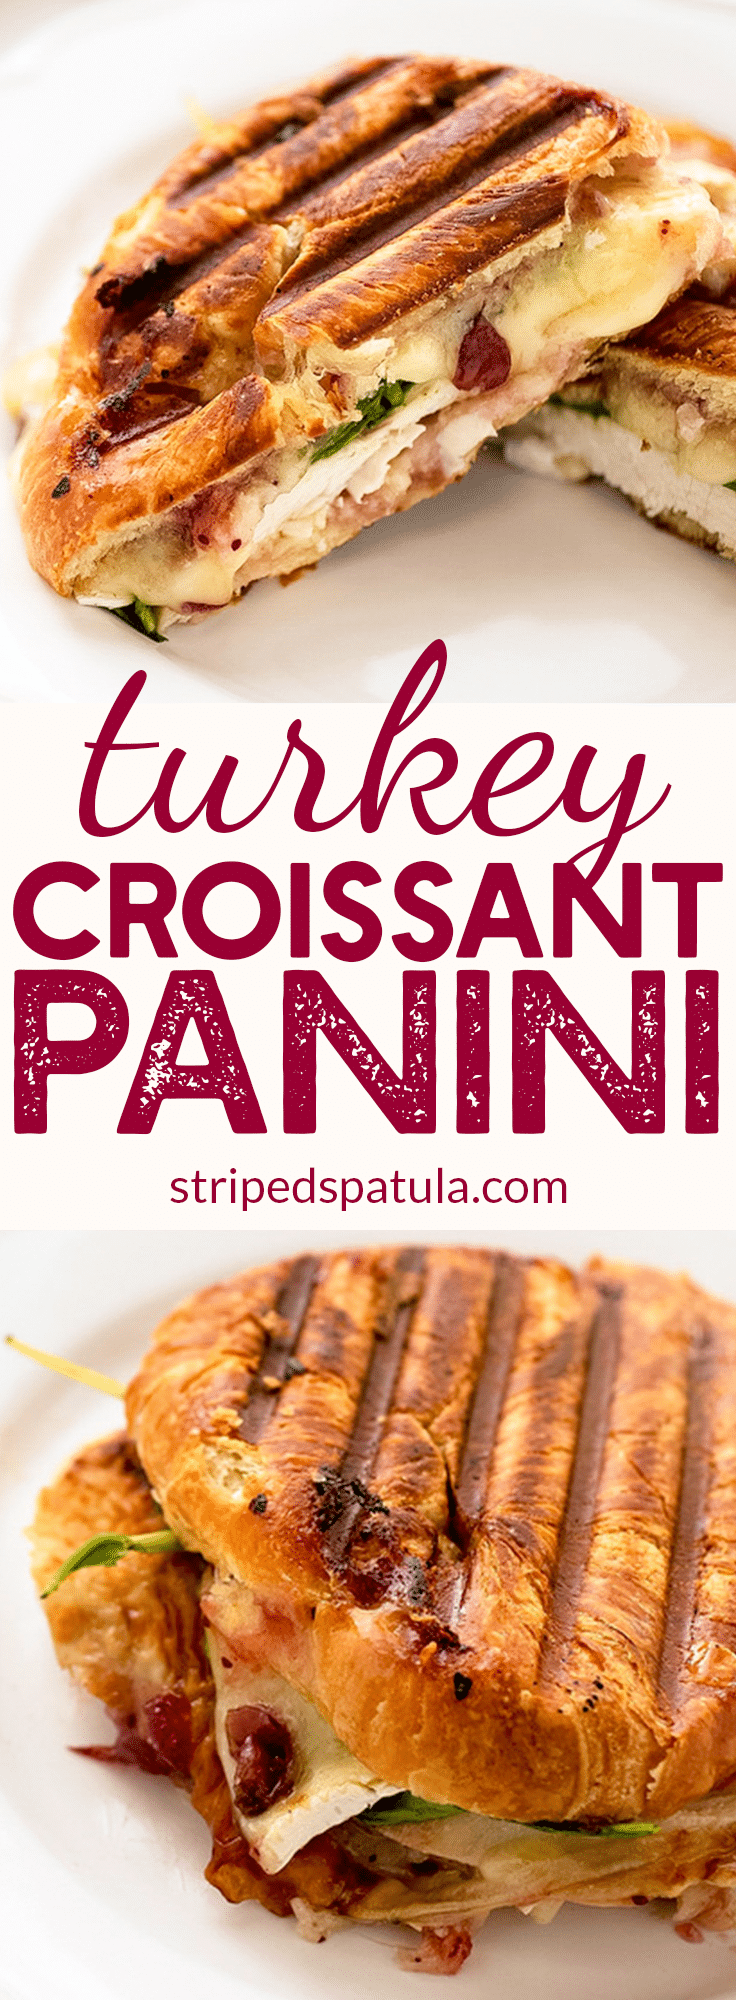 Turkey Croissant Panini with Brie and Cranberry Relish | Striped Spatula